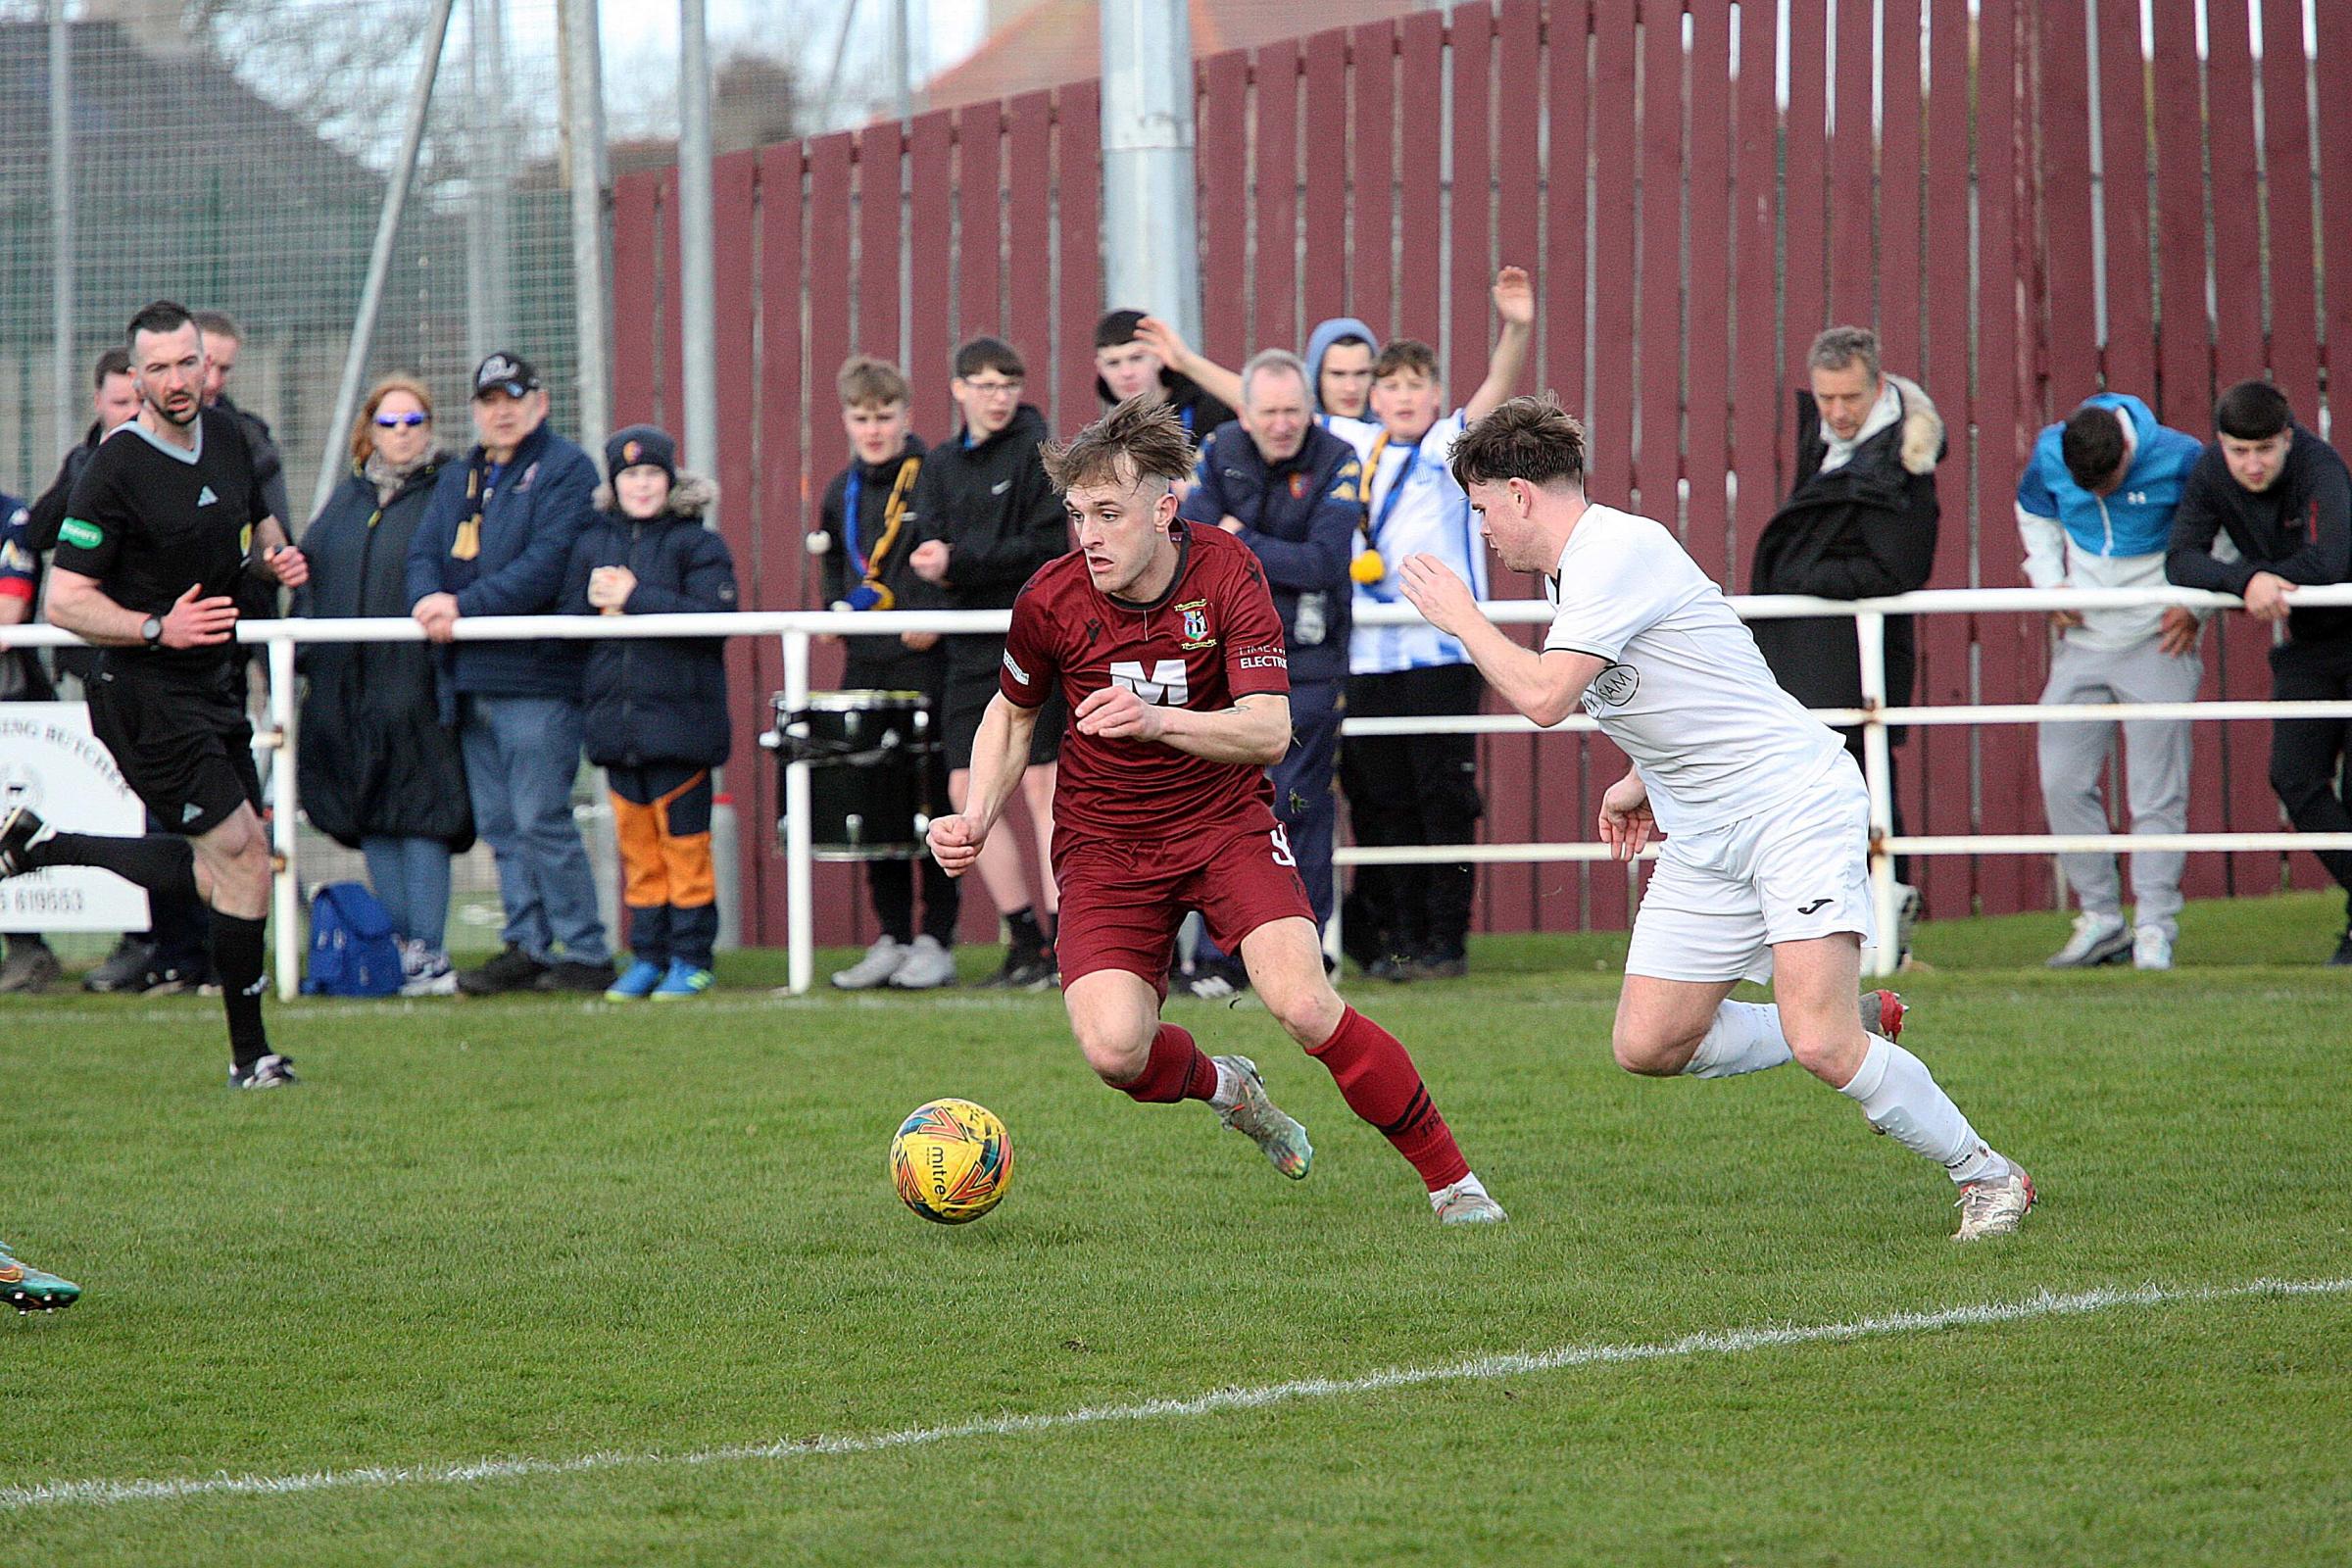 Tranent (maroon) saw their hopes of the South of Scotland Challenge Cup ended by East Kilbride